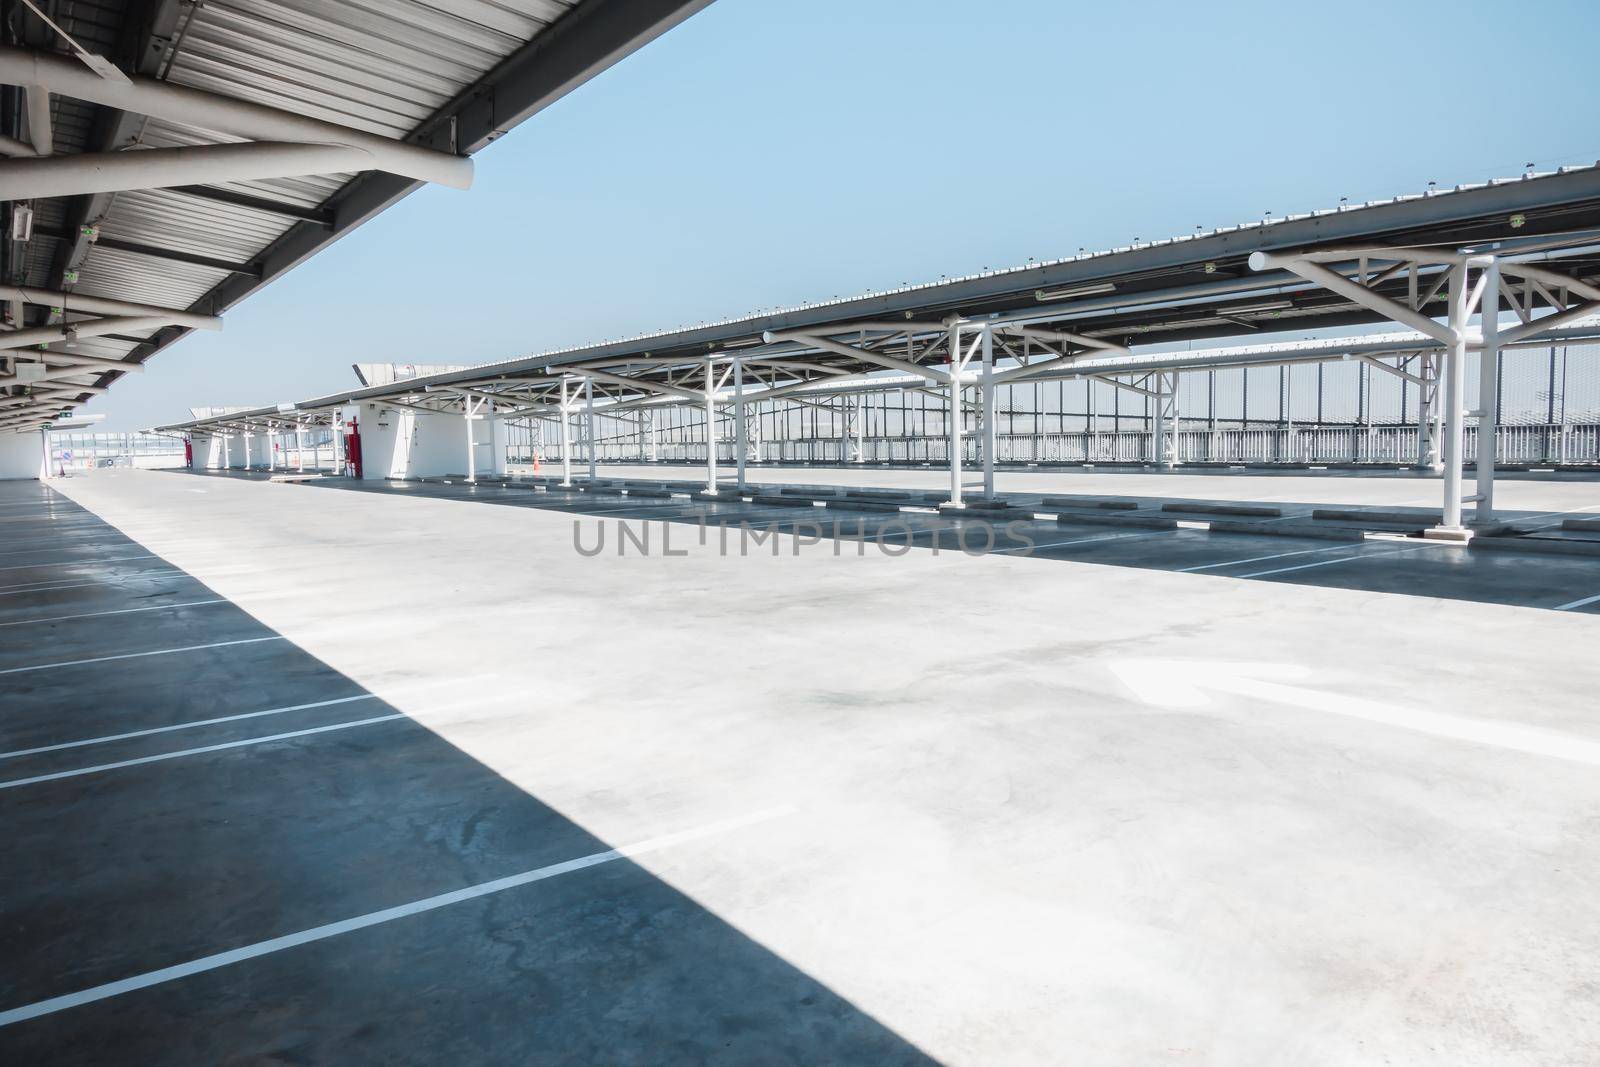 Car Parking Lot Area on Deck Floor of Shopping Mall, Perspective View Empty of Car Park Structure Building at Department Store. Auto Service Parking Lots by MahaHeang245789